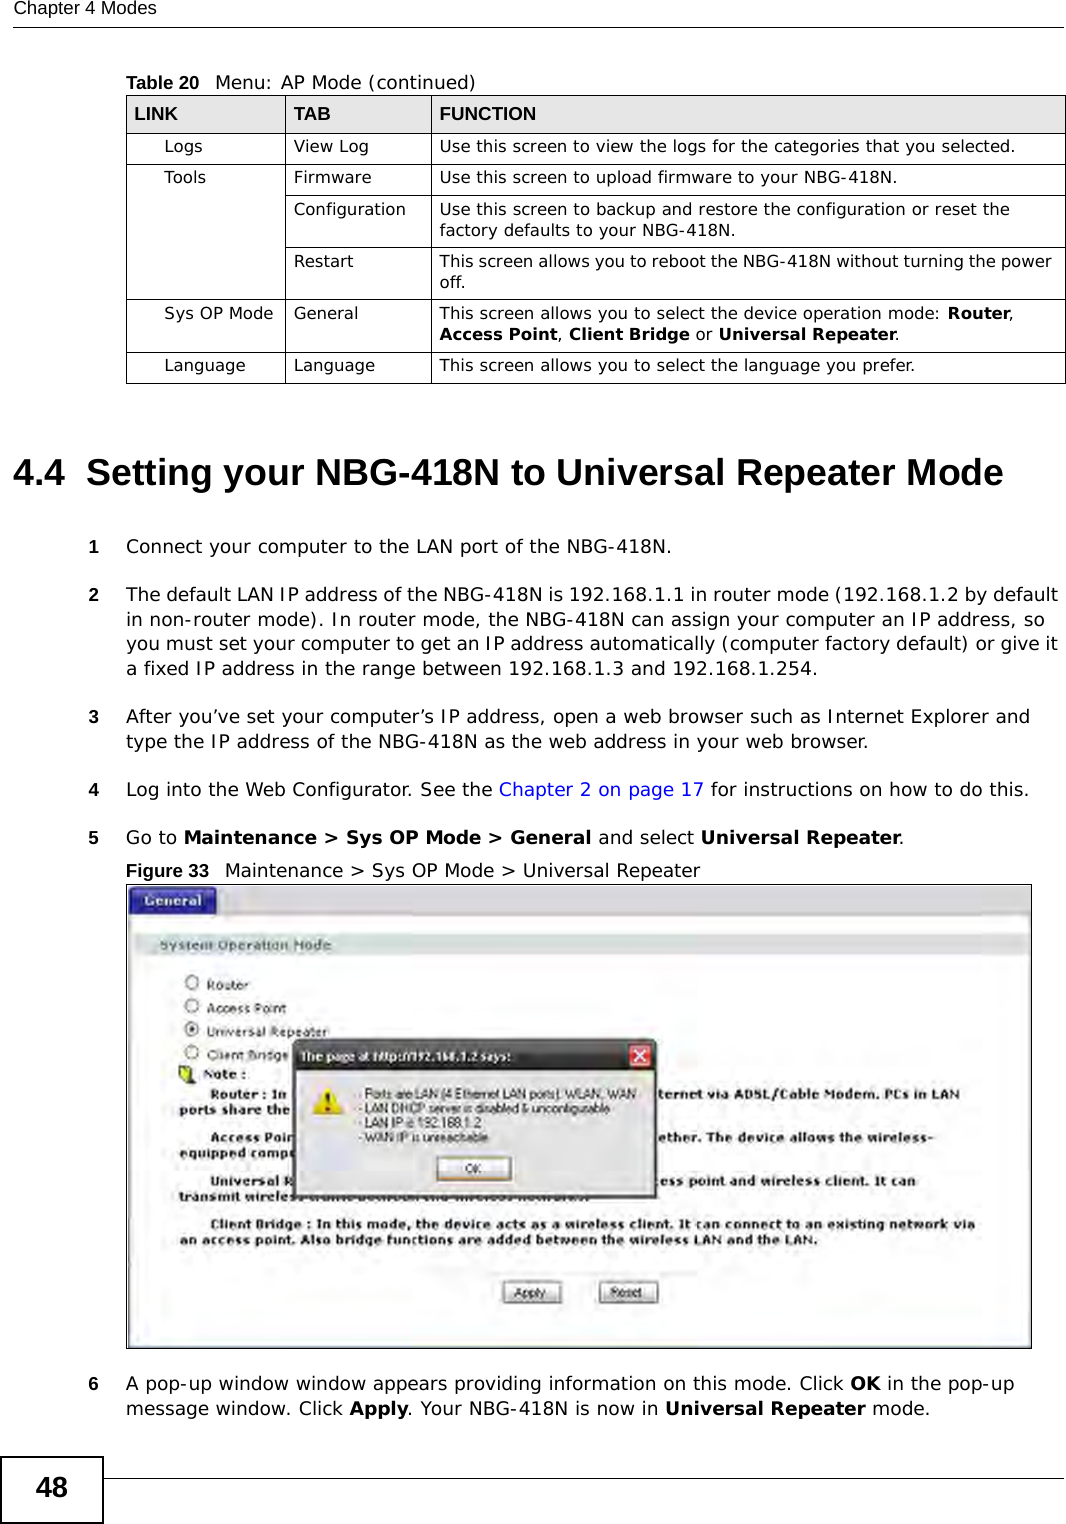 Chapter 4 Modes484.4  Setting your NBG-418N to Universal Repeater Mode1Connect your computer to the LAN port of the NBG-418N. 2The default LAN IP address of the NBG-418N is 192.168.1.1 in router mode (192.168.1.2 by default in non-router mode). In router mode, the NBG-418N can assign your computer an IP address, so you must set your computer to get an IP address automatically (computer factory default) or give it a fixed IP address in the range between 192.168.1.3 and 192.168.1.254.3After you’ve set your computer’s IP address, open a web browser such as Internet Explorer and type the IP address of the NBG-418N as the web address in your web browser.4Log into the Web Configurator. See the Chapter 2 on page 17 for instructions on how to do this.5Go to Maintenance &gt; Sys OP Mode &gt; General and select Universal Repeater.Figure 33   Maintenance &gt; Sys OP Mode &gt; Universal Repeater6A pop-up window window appears providing information on this mode. Click OK in the pop-up message window. Click Apply. Your NBG-418N is now in Universal Repeater mode.Logs View Log Use this screen to view the logs for the categories that you selected.Tools Firmware Use this screen to upload firmware to your NBG-418N.Configuration Use this screen to backup and restore the configuration or reset the factory defaults to your NBG-418N. Restart This screen allows you to reboot the NBG-418N without turning the power off.Sys OP Mode General This screen allows you to select the device operation mode: Router, Access Point, Client Bridge or Universal Repeater.Language Language This screen allows you to select the language you prefer.Table 20   Menu: AP Mode (continued)LINK TABFUNCTION